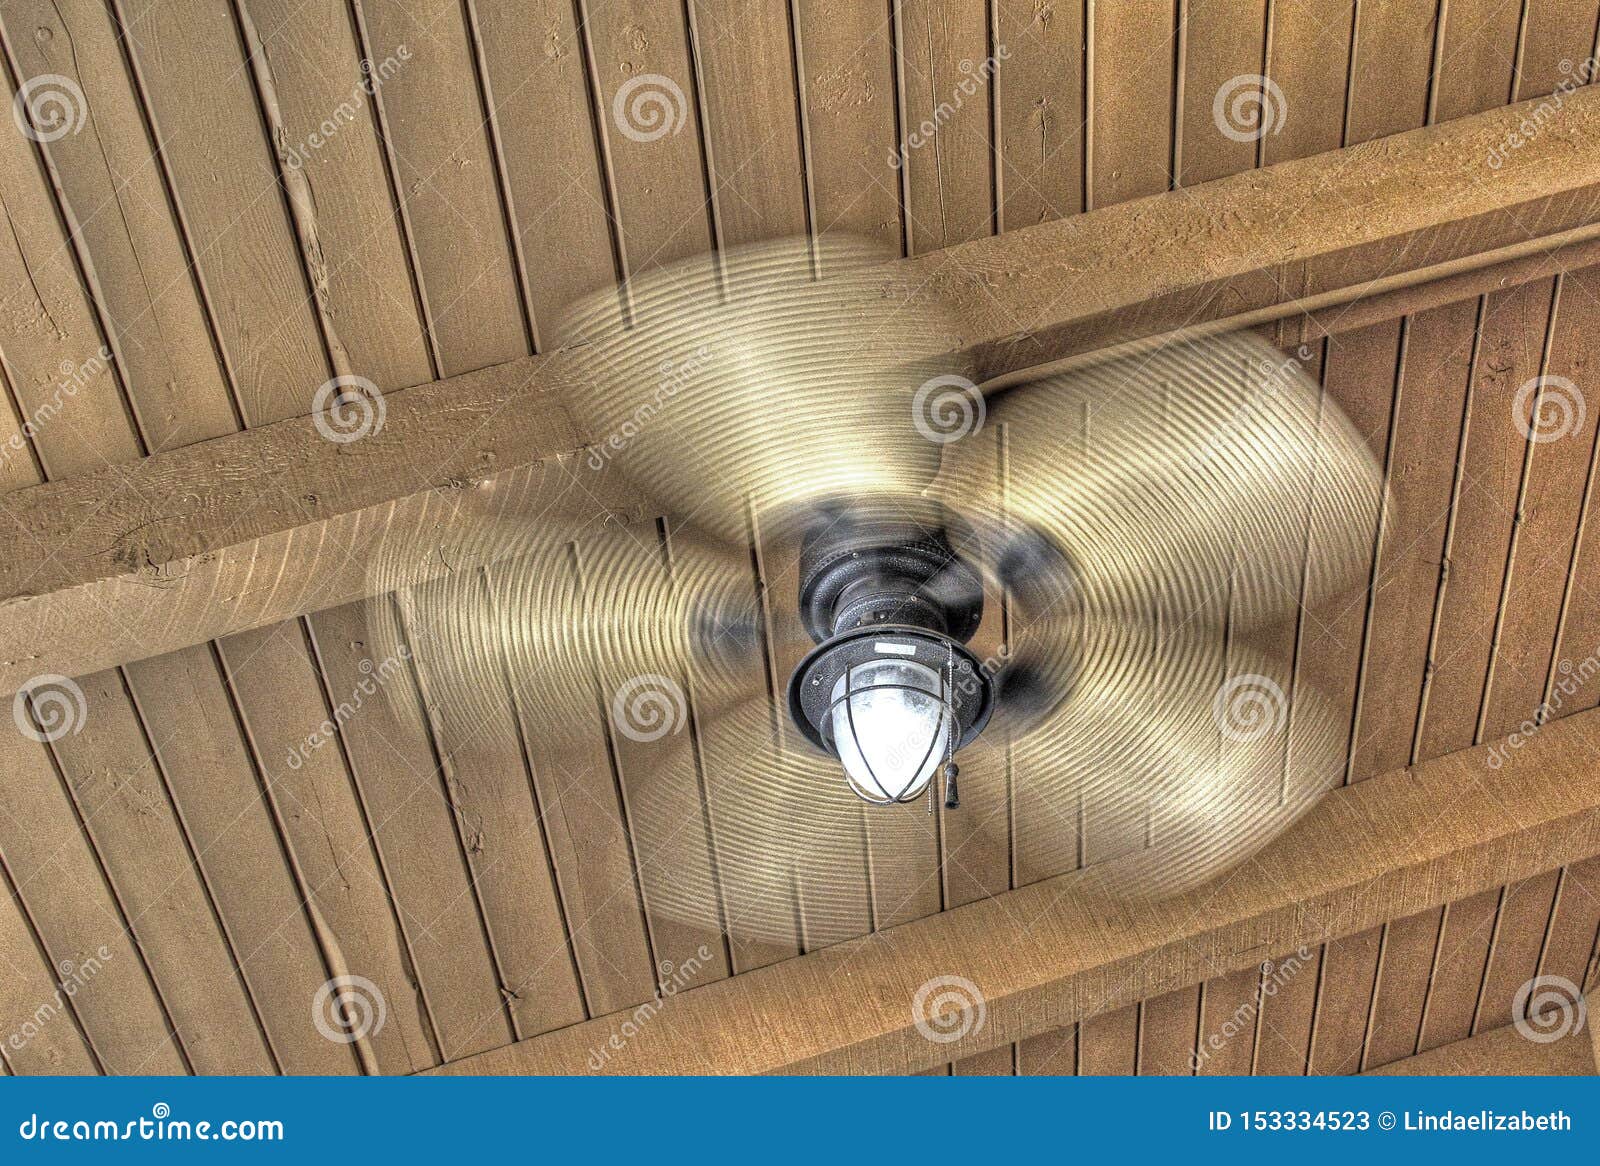 Spinning Ceiling Fan With Light On Rustic Wood Ceiling Stock